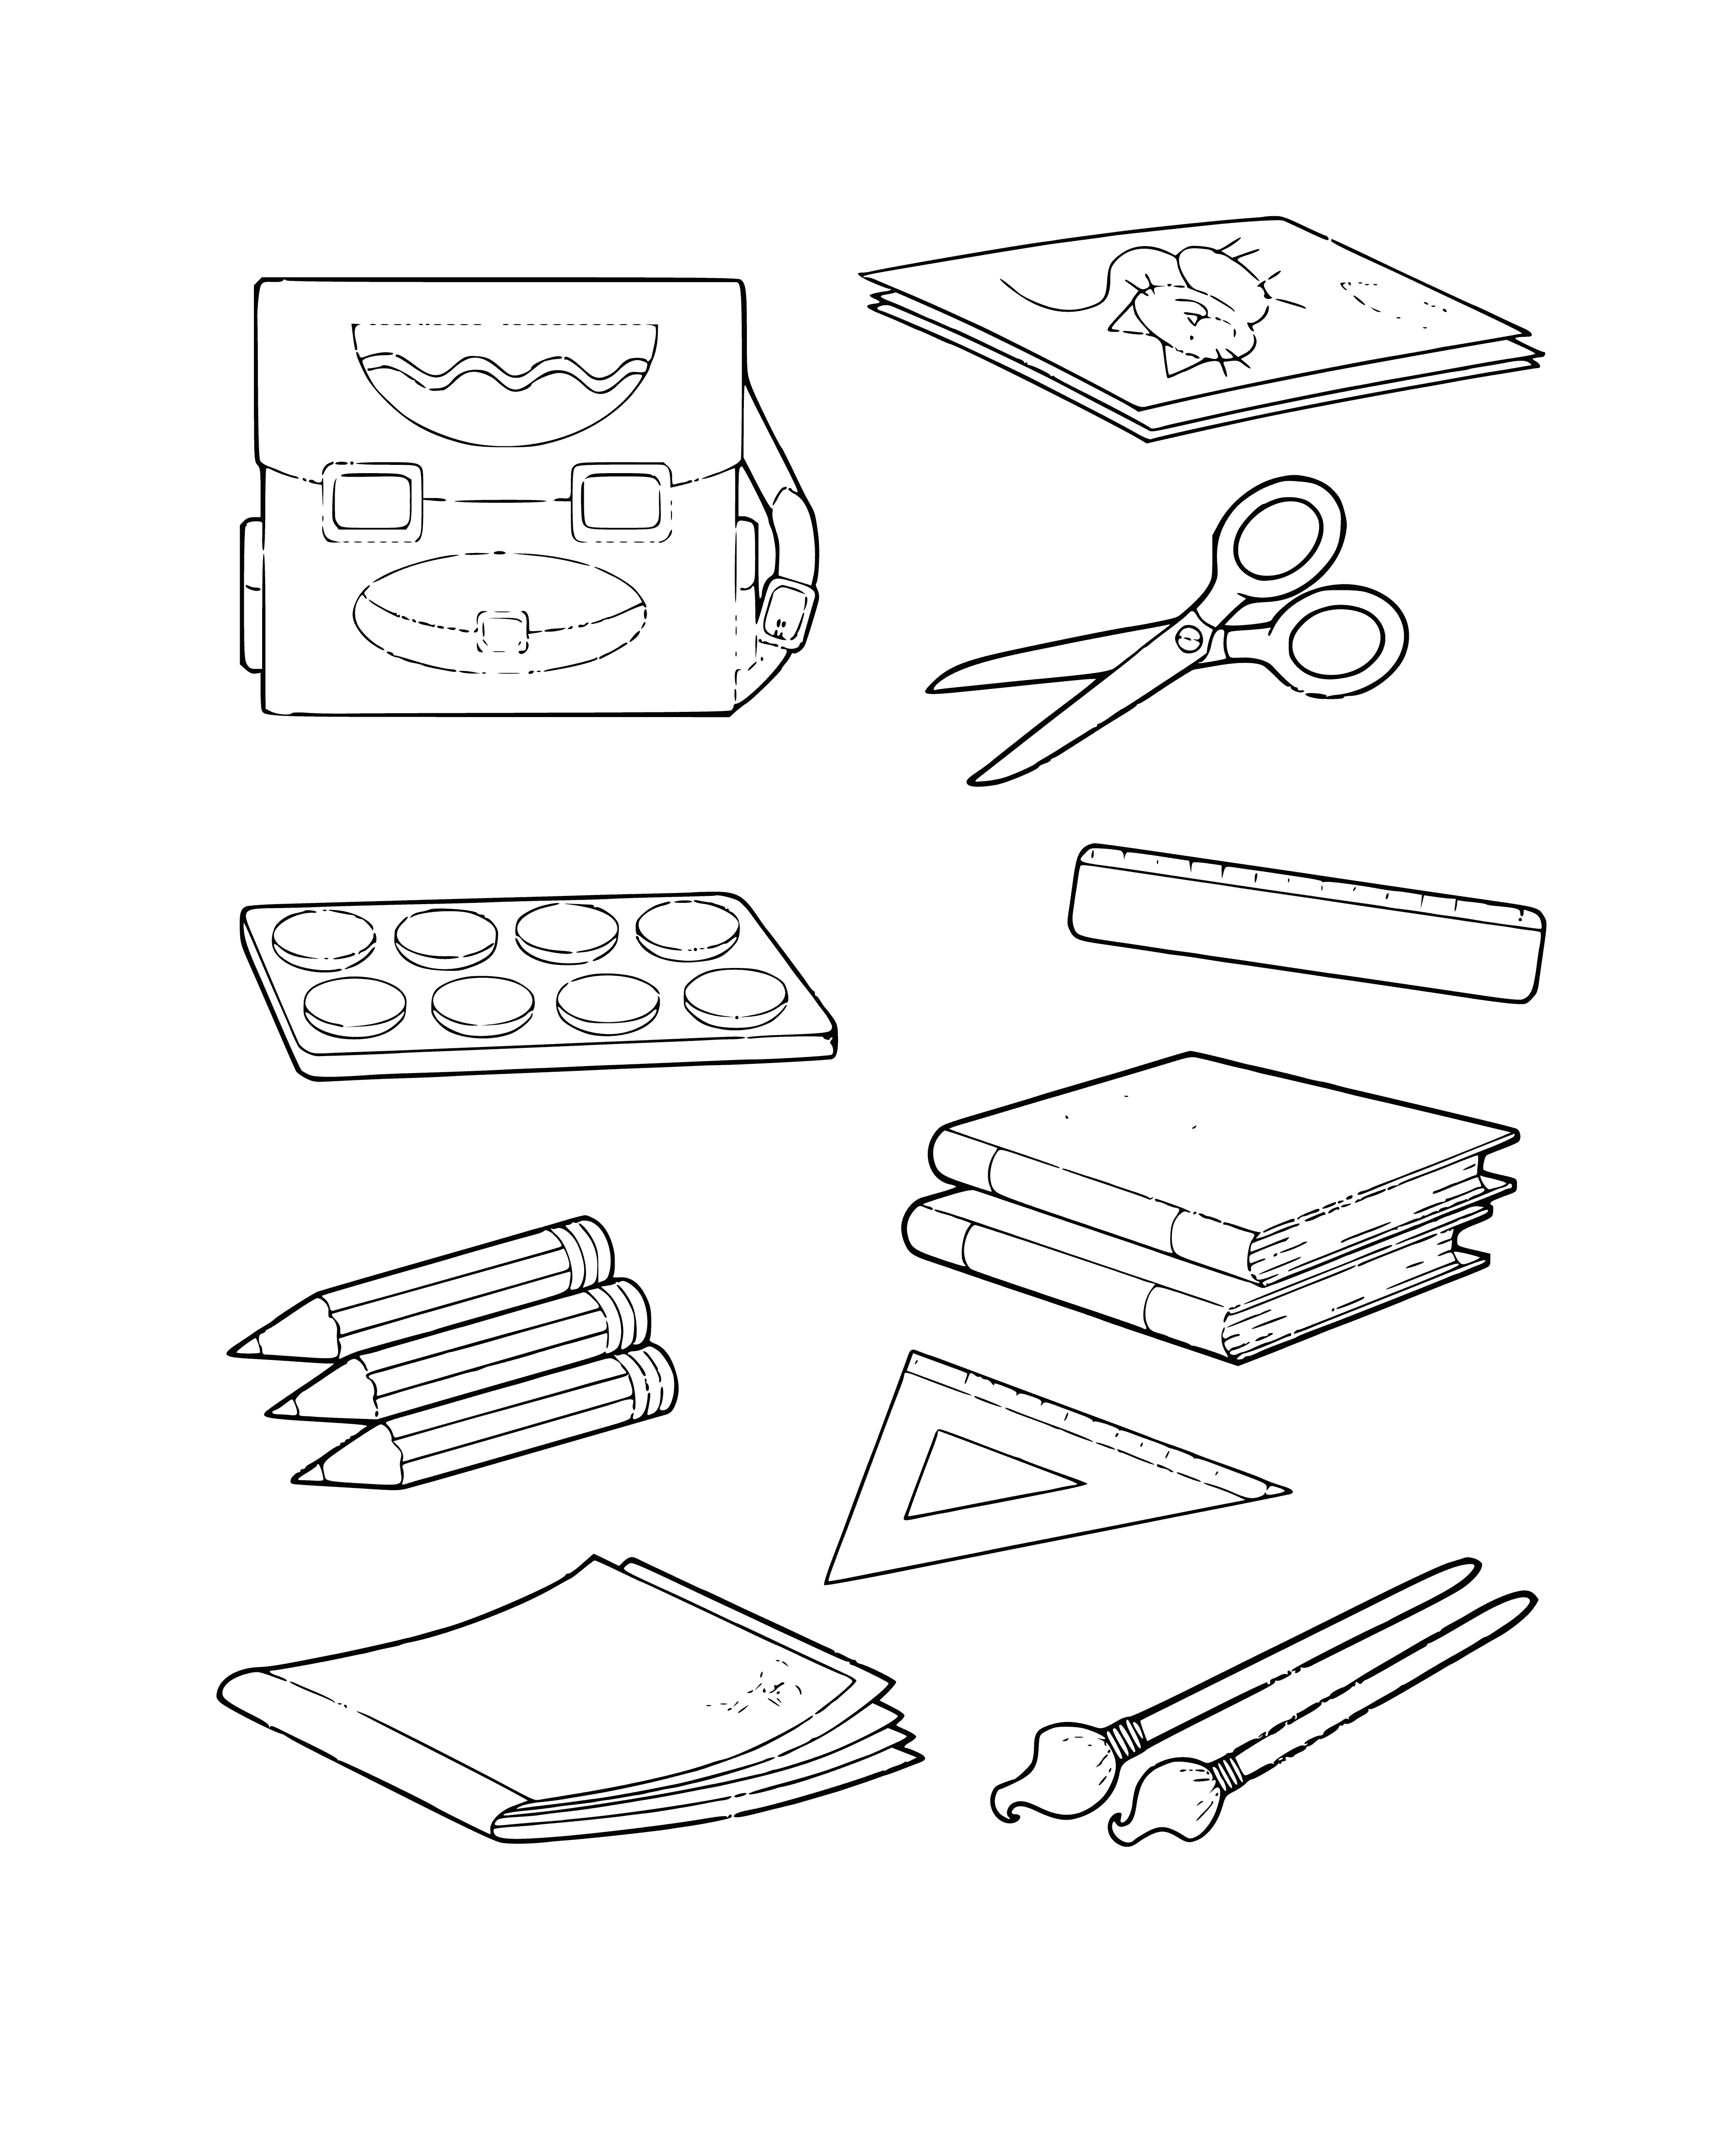 coloring page: September 1st is the day of knowledge! Color school supplies scattered around a page to show it. Pencil, pen, notebook, rulers, and more given different colors. #backtoschool